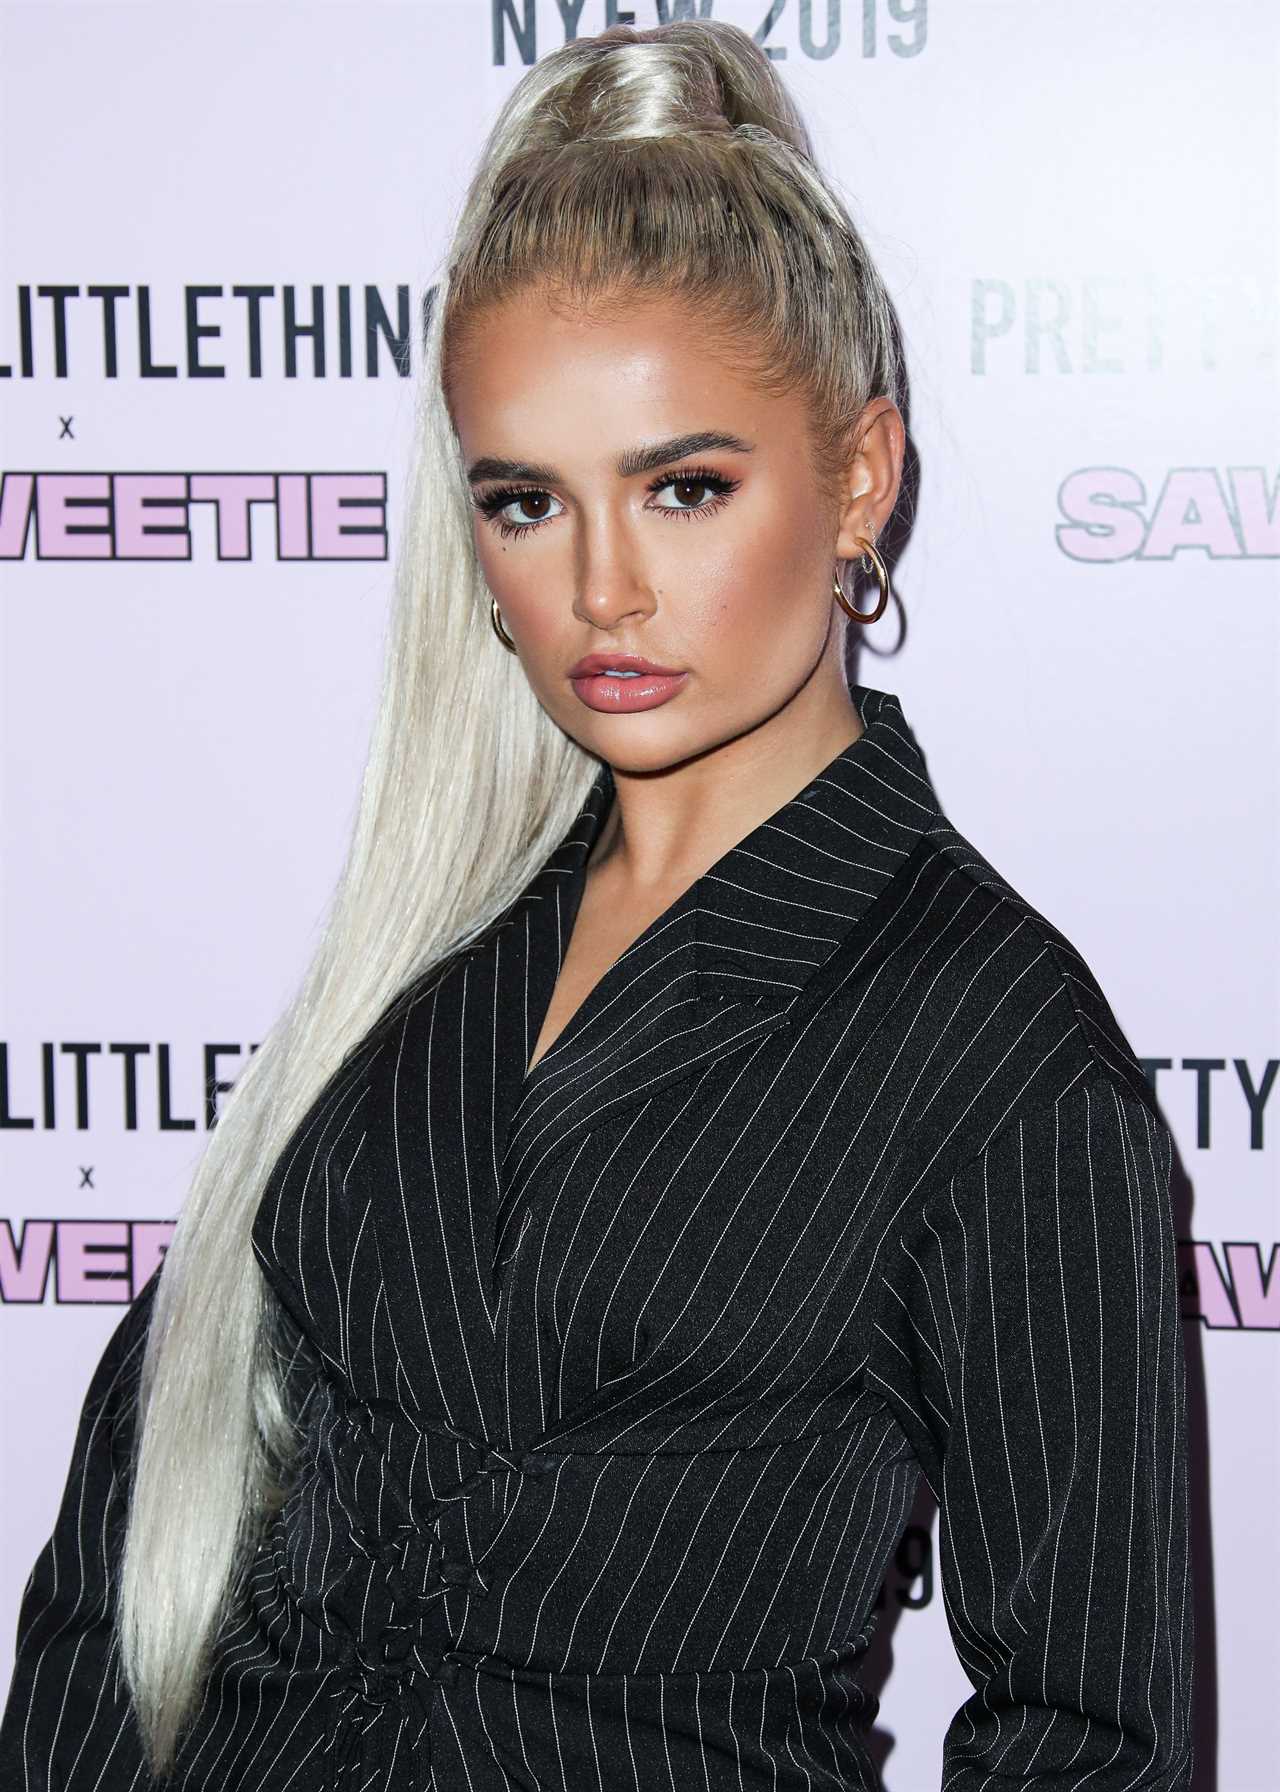 Molly-Mae finally hits back at Love Island co-stars over feud and says ‘I’m not nasty – we just weren’t friends!’